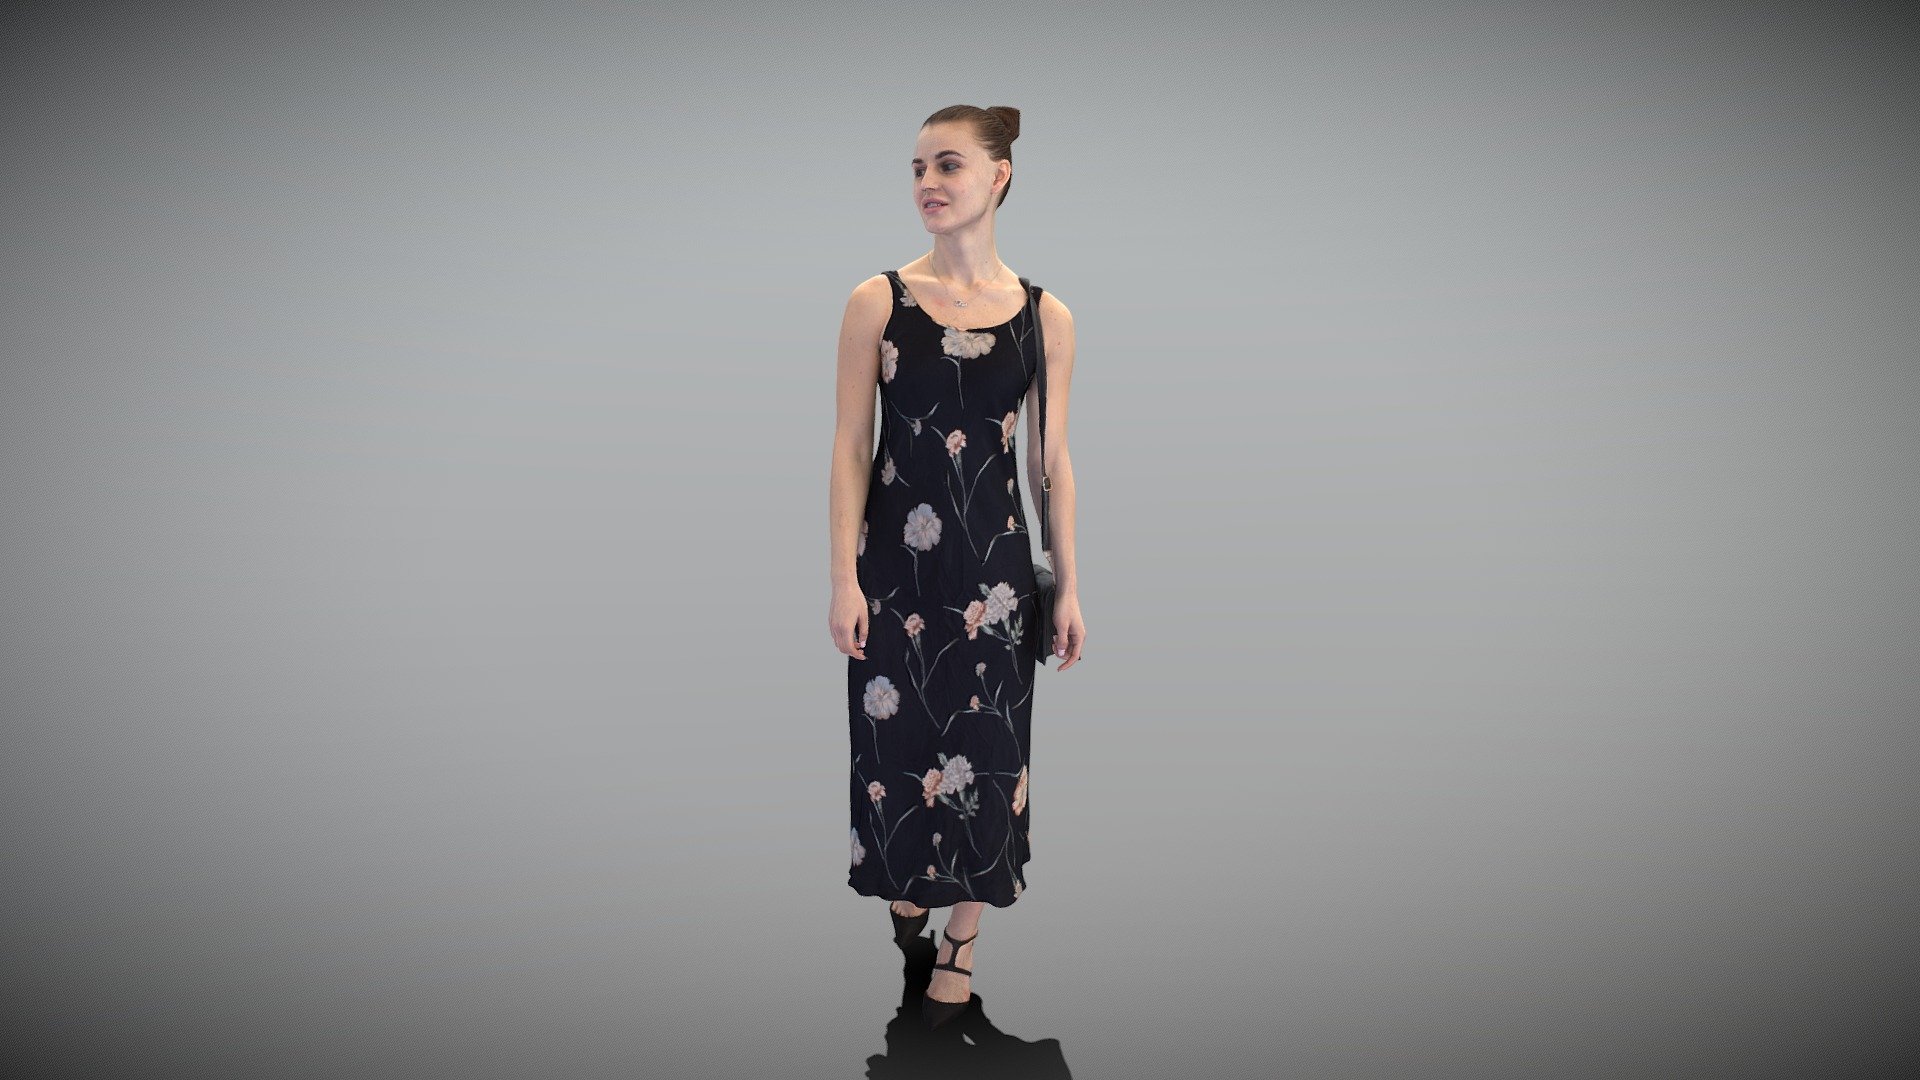 This is a true human size and detailed model of a beautiful young woman of Caucasian appearance dressed in maxi floral dress. The model is captured in casual pose to be perfectly matching for various architectural, product visualization as a background character within urban installations, city designs, outdoor design presentations, VR/AR content, etc.

Technical specifications:




digital double 3d scan model

150k &amp; 30k triangles | double triangulated

high-poly model (.ztl tool with 5 subdivisions) clean and retopologized automatically via ZRemesher

sufficiently clean

PBR textures 8K resolution: Diffuse, Normal, Specular maps

non-overlapping UV map

no extra plugins are required for this model

Download package includes a Cinema 4D project file with Redshift shader, OBJ, FBX, STL files, which are applicable for 3ds Max, Maya, Unreal Engine, Unity, Blender, etc. All the textures you will find in the “Tex” folder, included into the main archive.

3D EVERYTHING

Stand with Ukraine! - Beautiful lady in long evening dress 399 - Buy Royalty Free 3D model by deep3dstudio 3d model